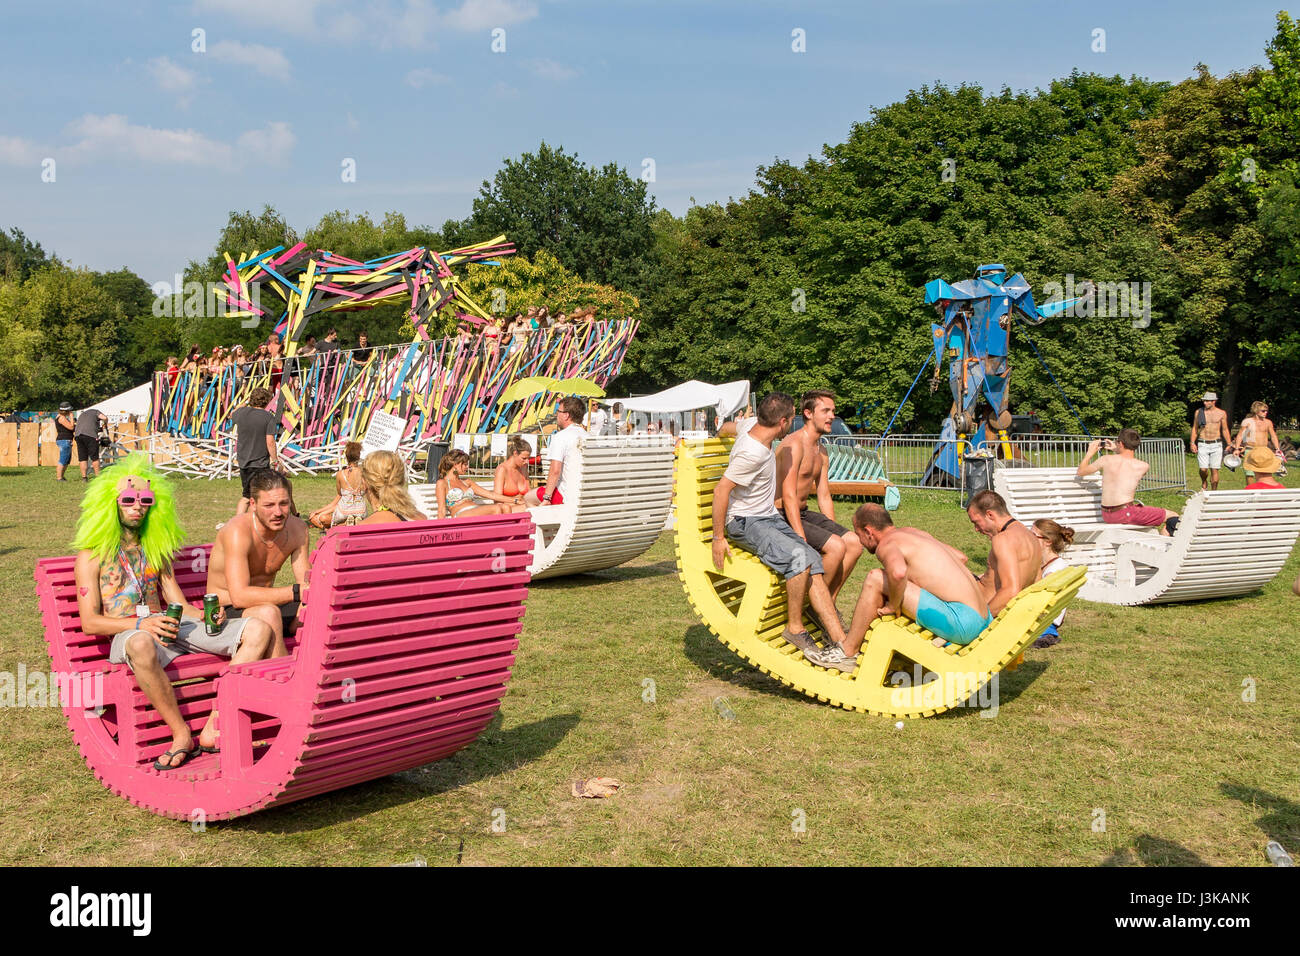 Festivalgoers at the Sziget Festival in Budapest, Hungary Stock Photo